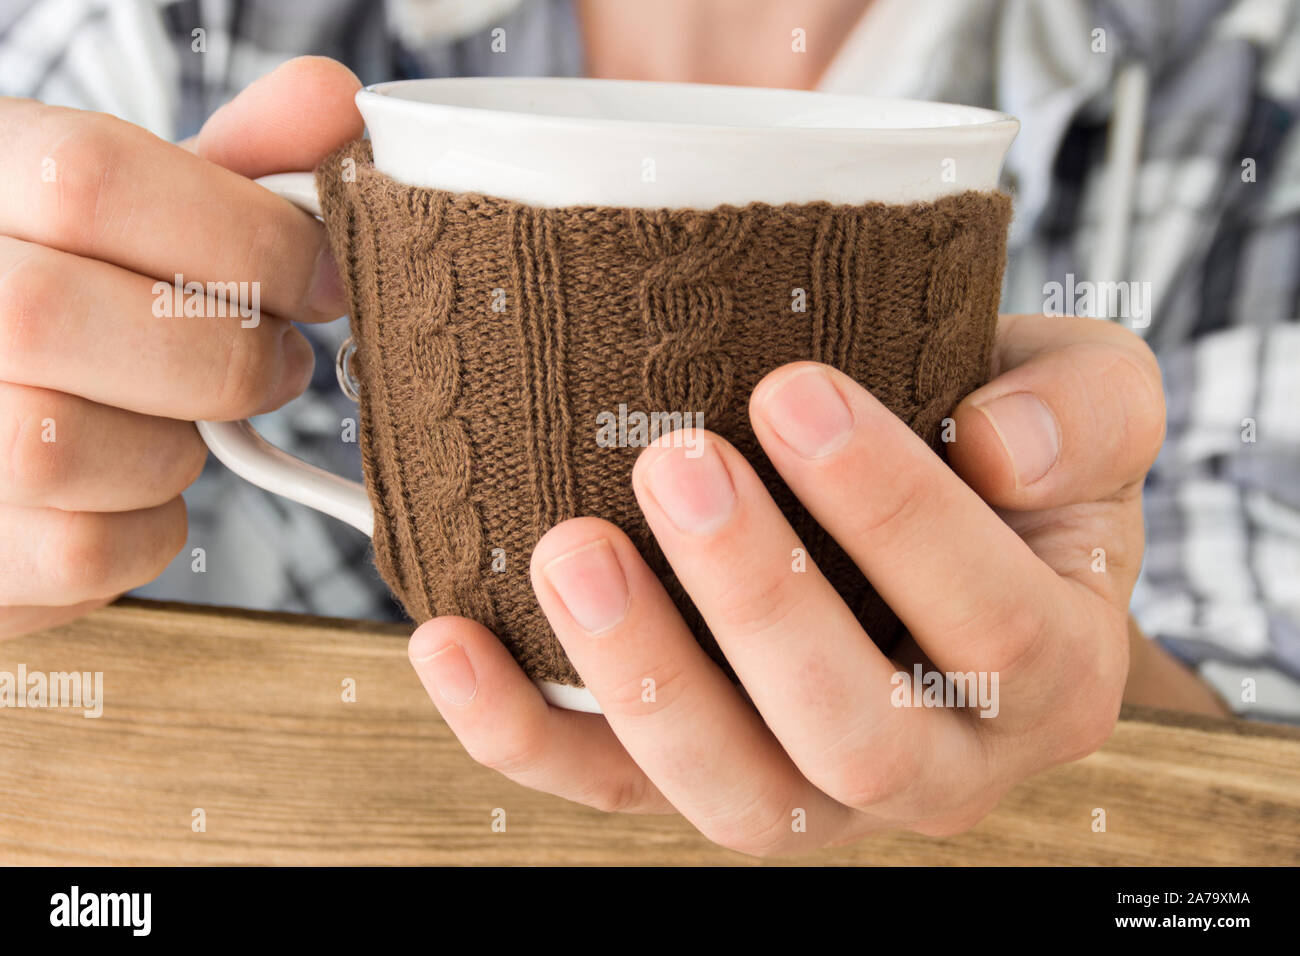 Cup warmer in male hand Stock Photo